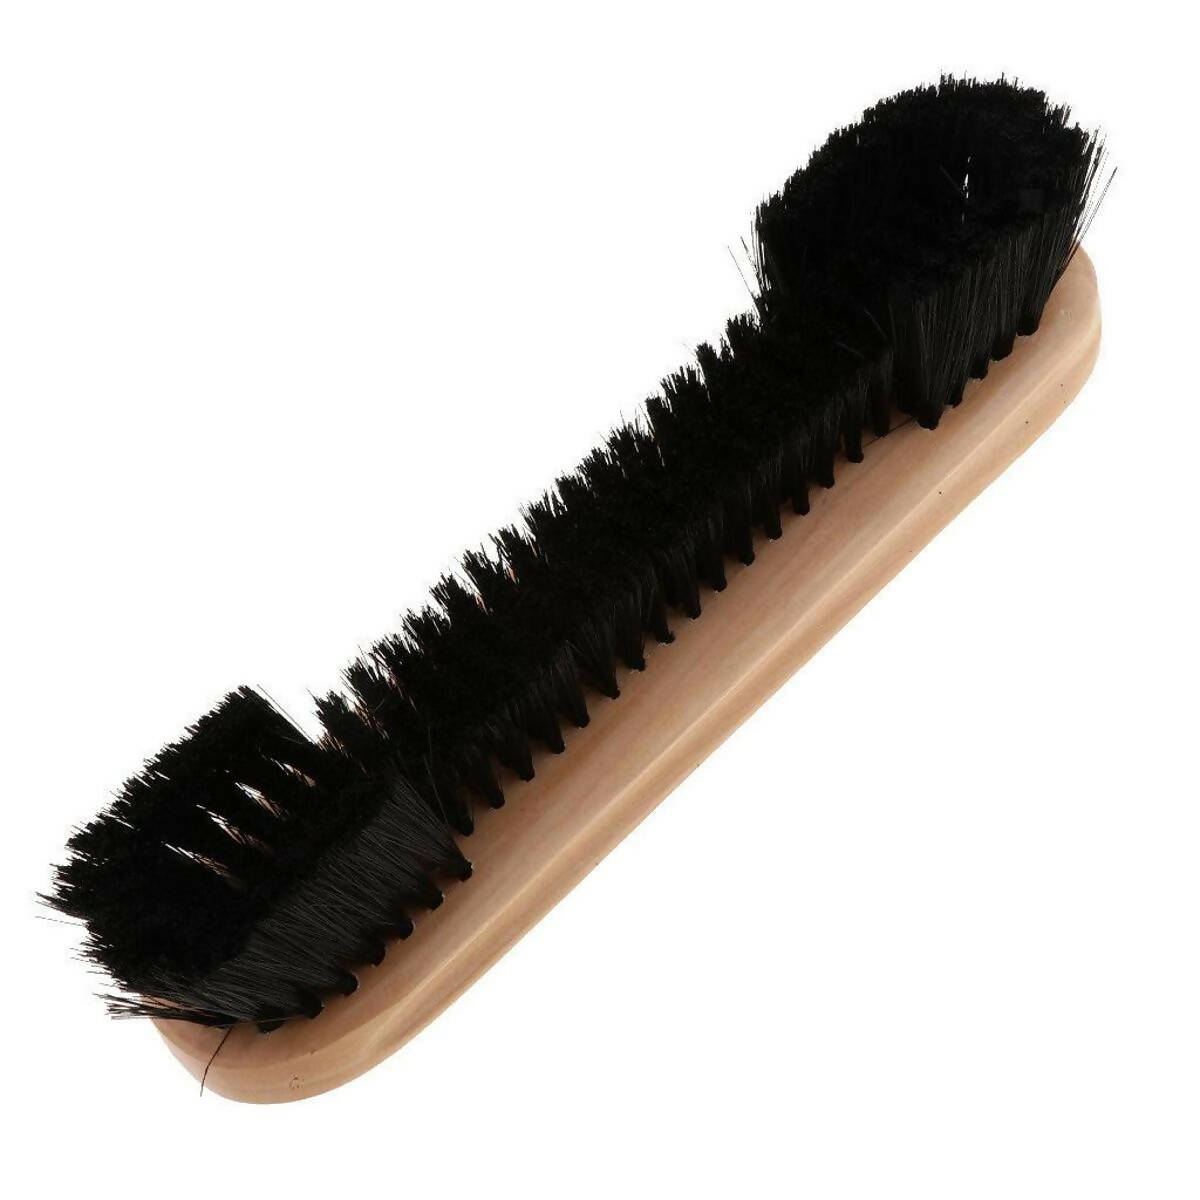 8 Inch Wooden Brush for Snooker Billiard Pool table